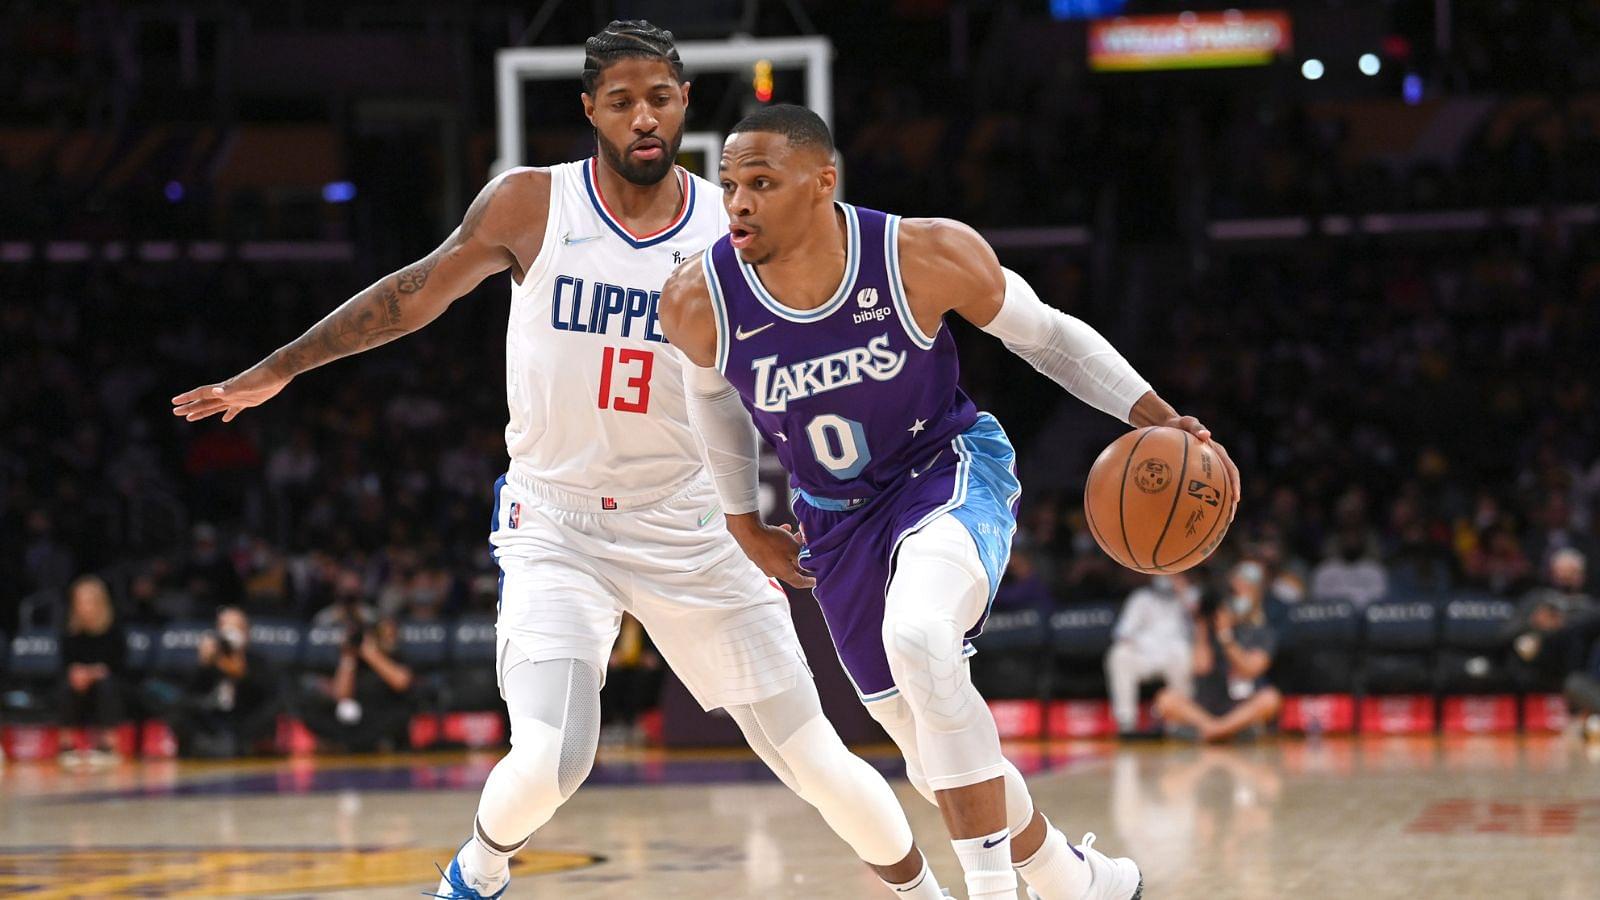 “Keep ya Sanity Russell Westbrook!”: Clippers Star Paul George Tweets Out his Support to the Disgruntled Lakers Guard